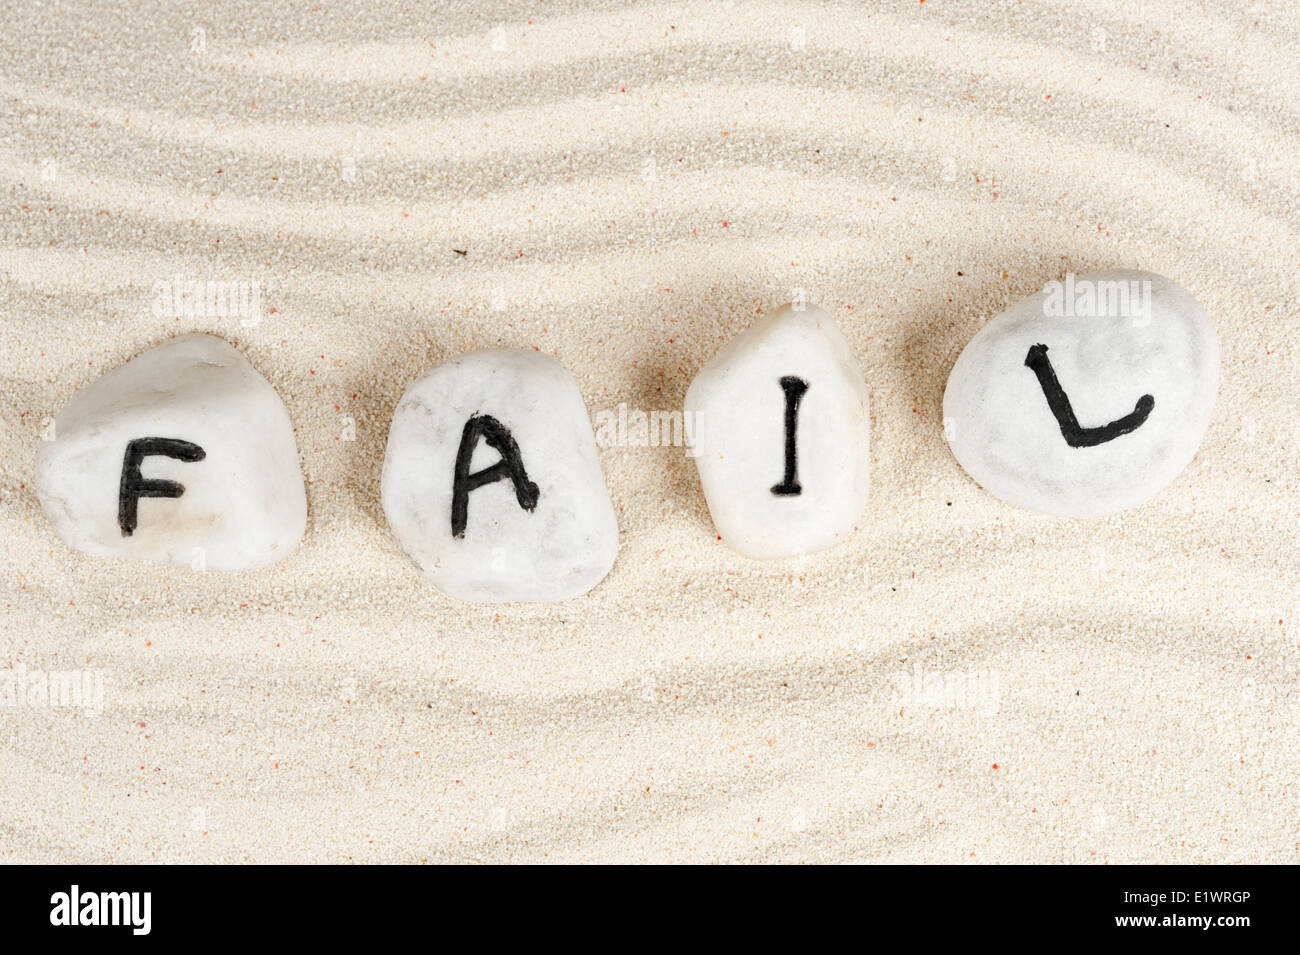 Fail word on group of pebbles Stock Photo